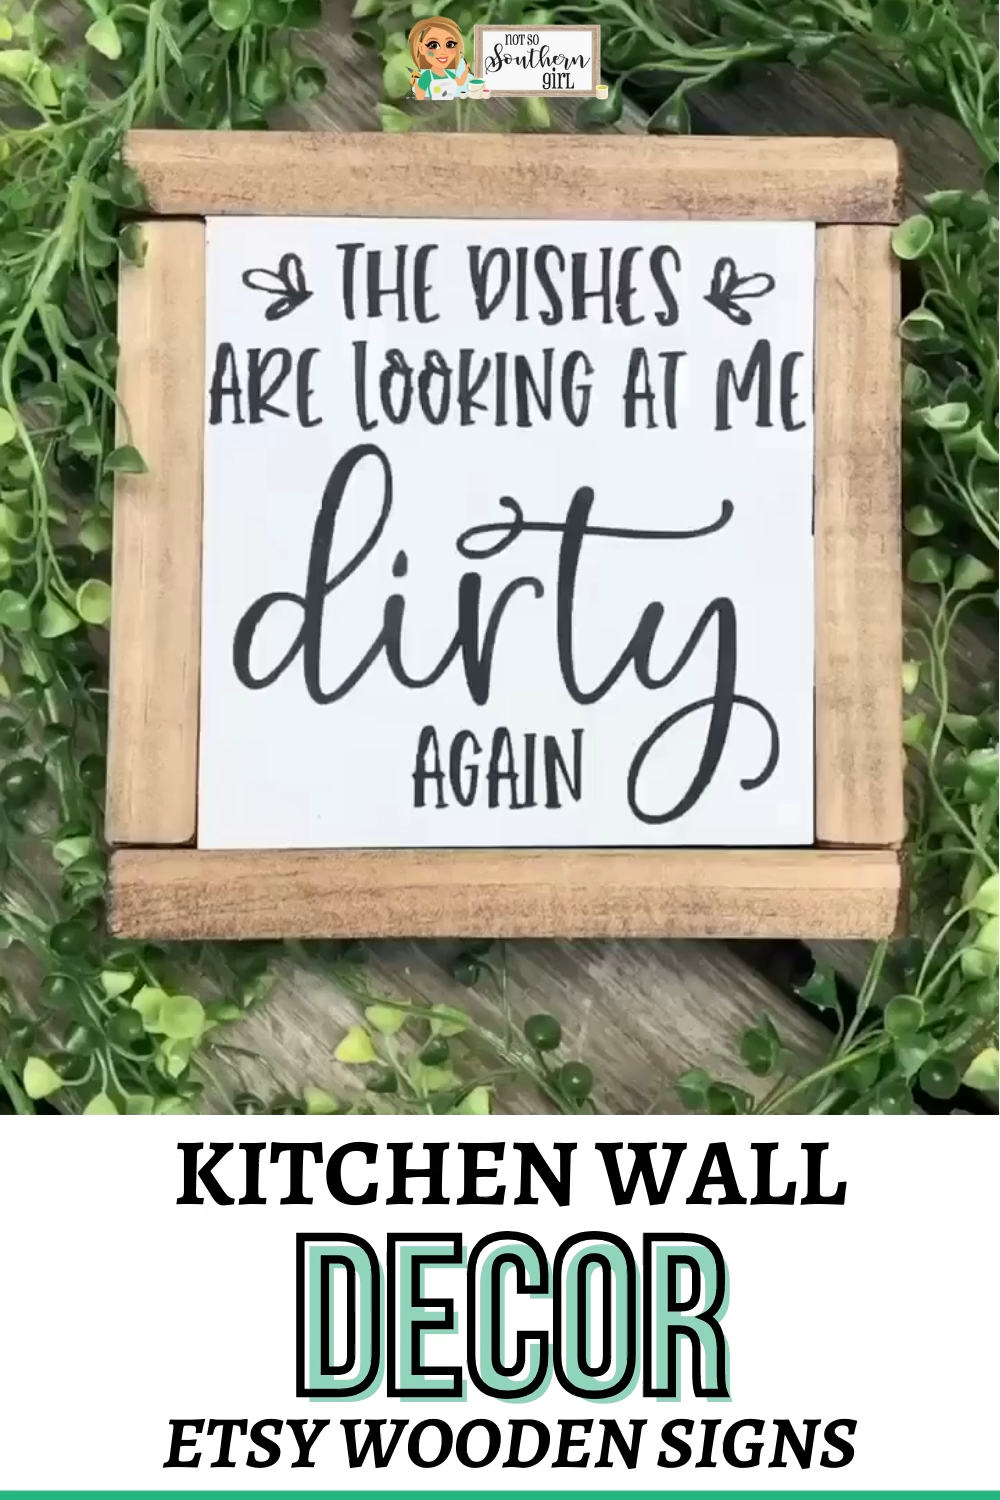 Kitchen Wall Decor - Etsy Wooden Signs -   20 home decor signs quote ideas